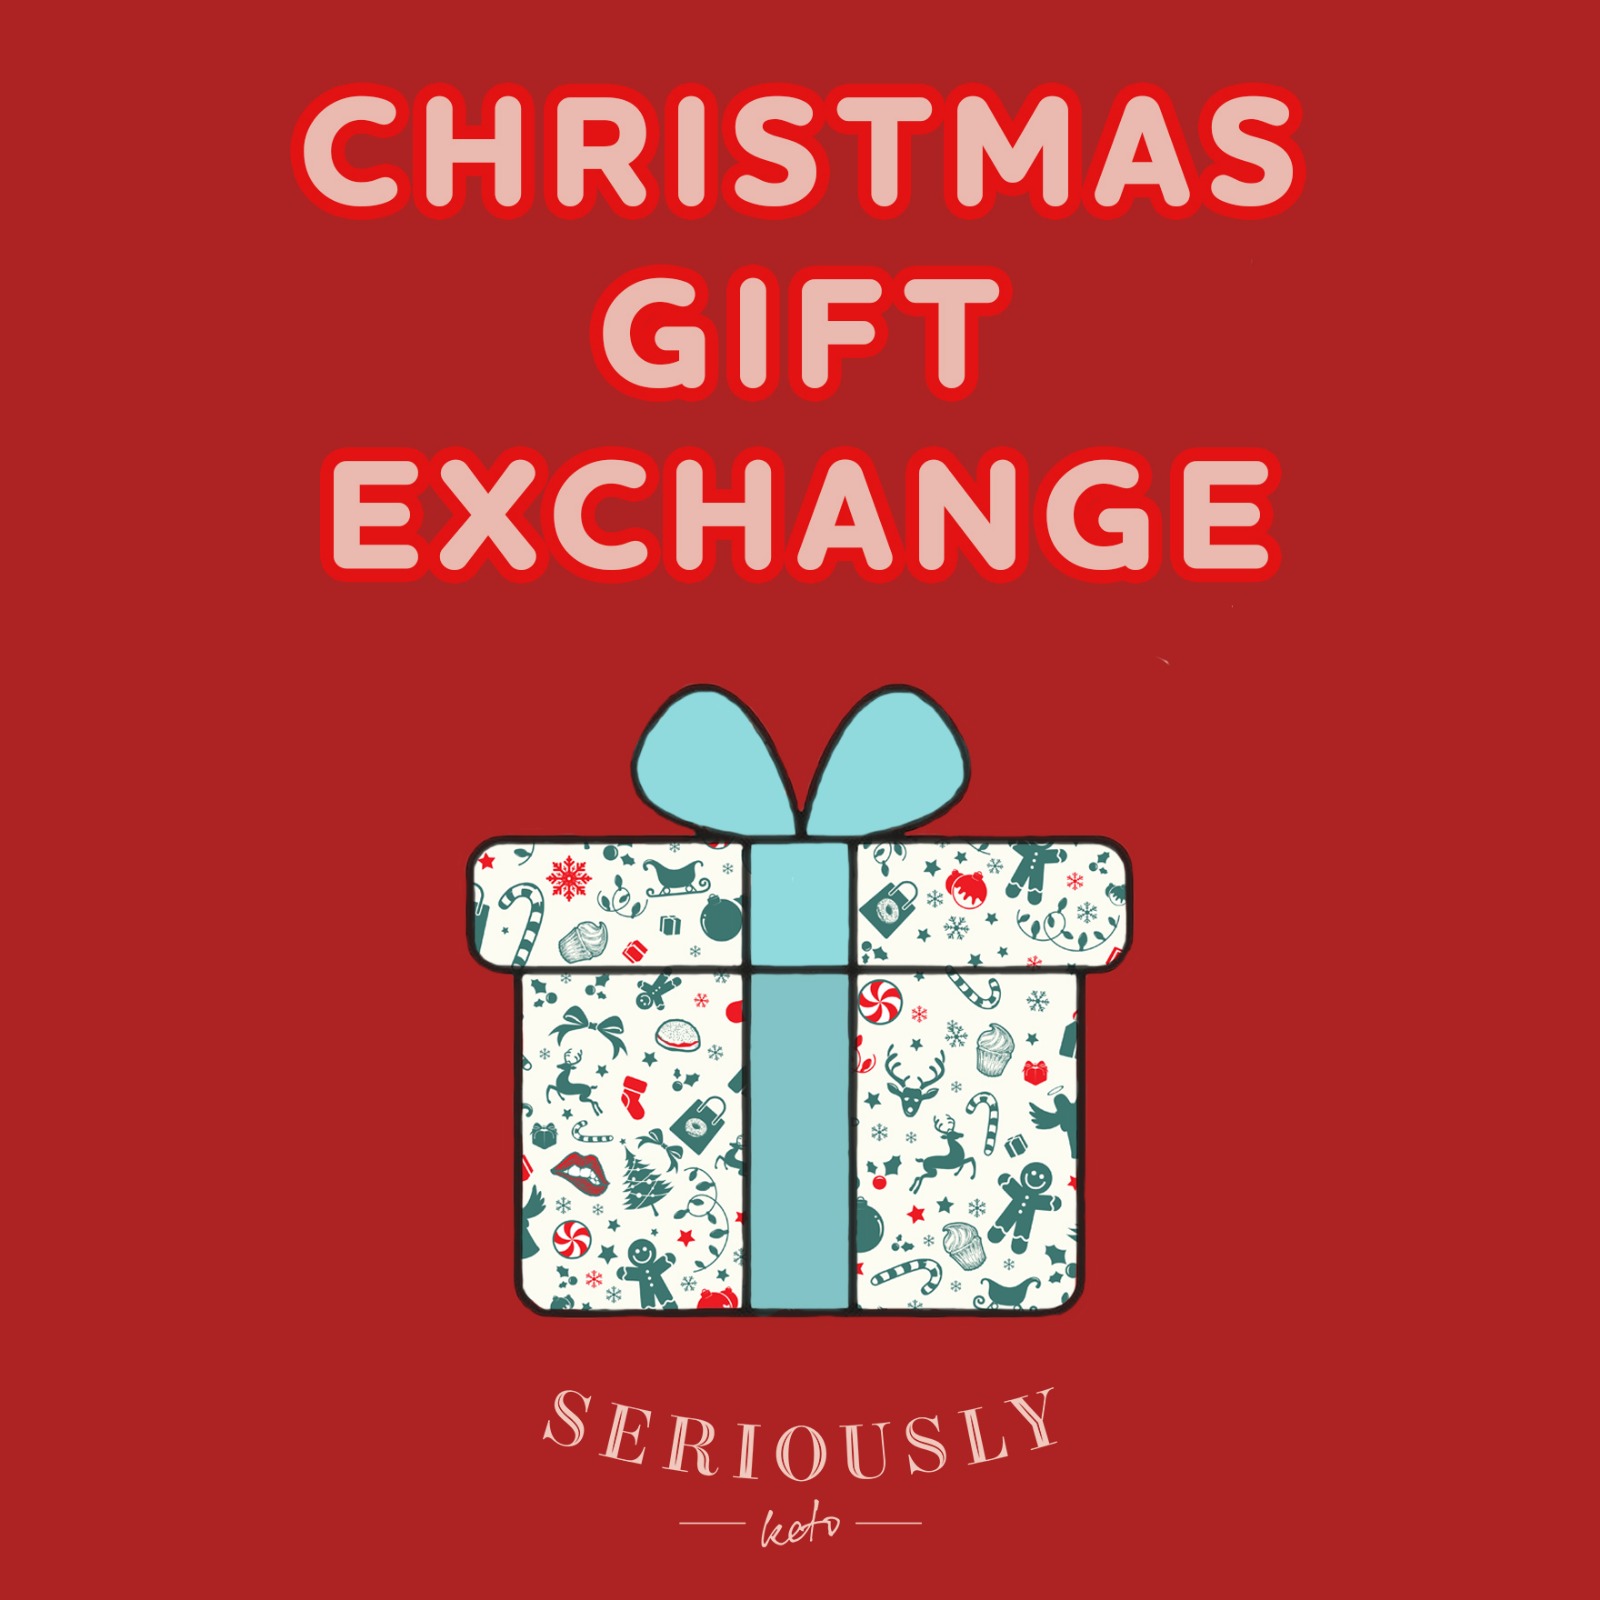 holiday gift exchange facebook